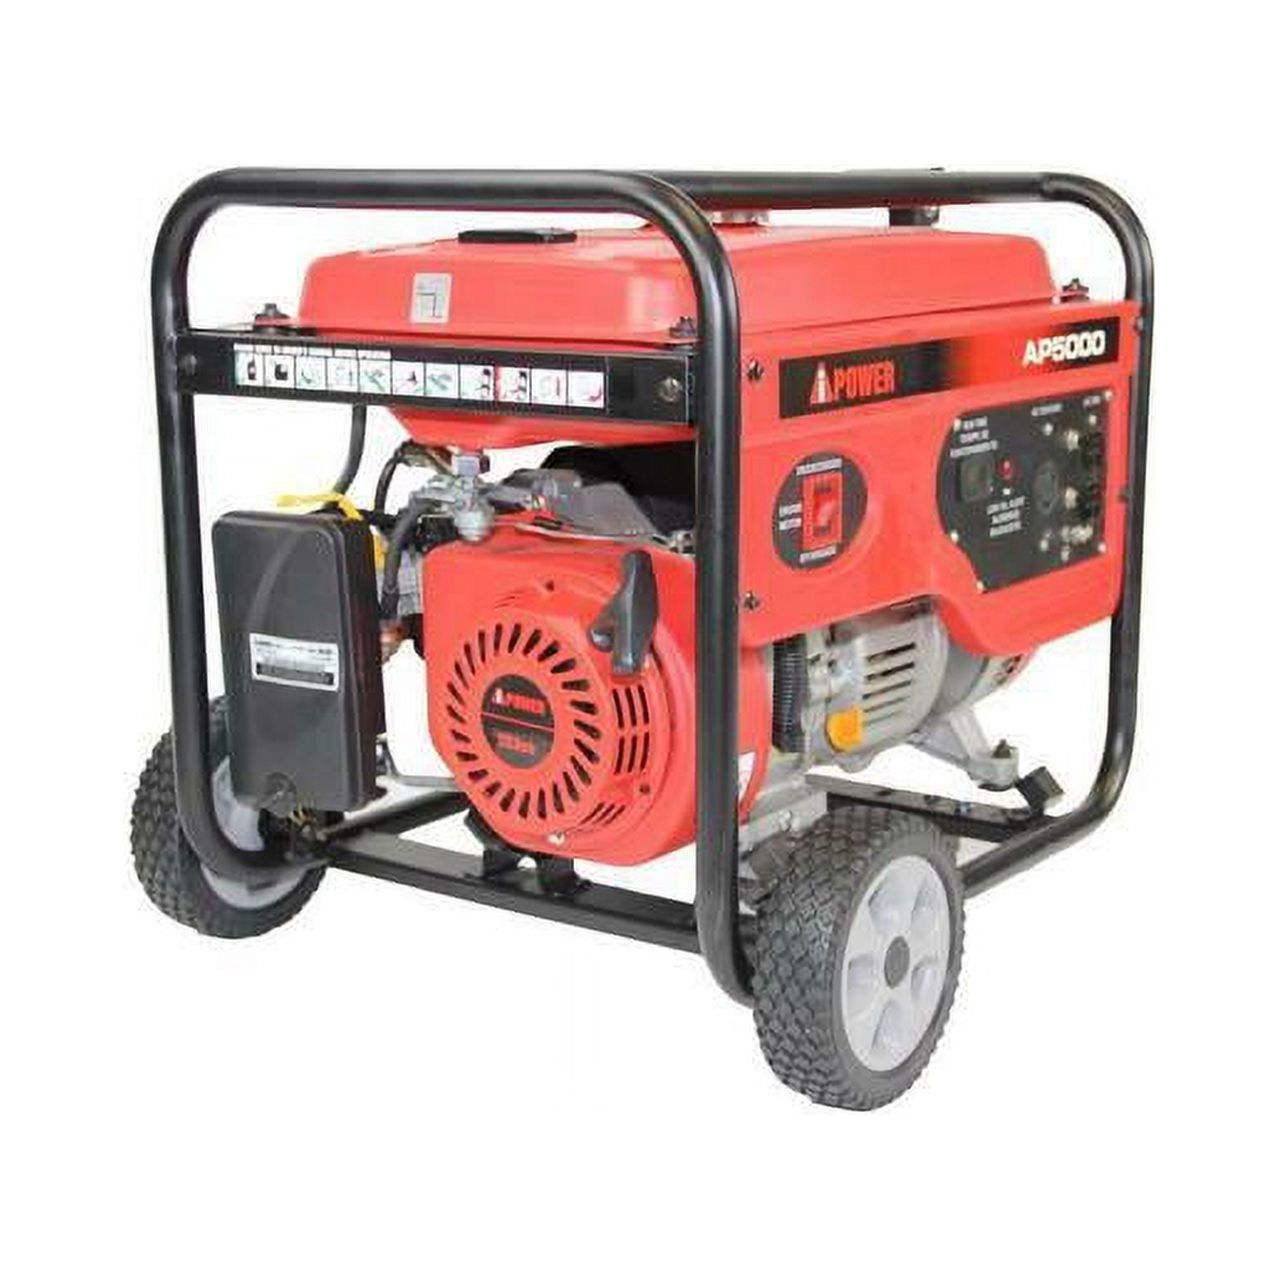 A-iPower AP5000 Gasoline Portable Generator W/ 5000W Starting Watts - image 1 of 5